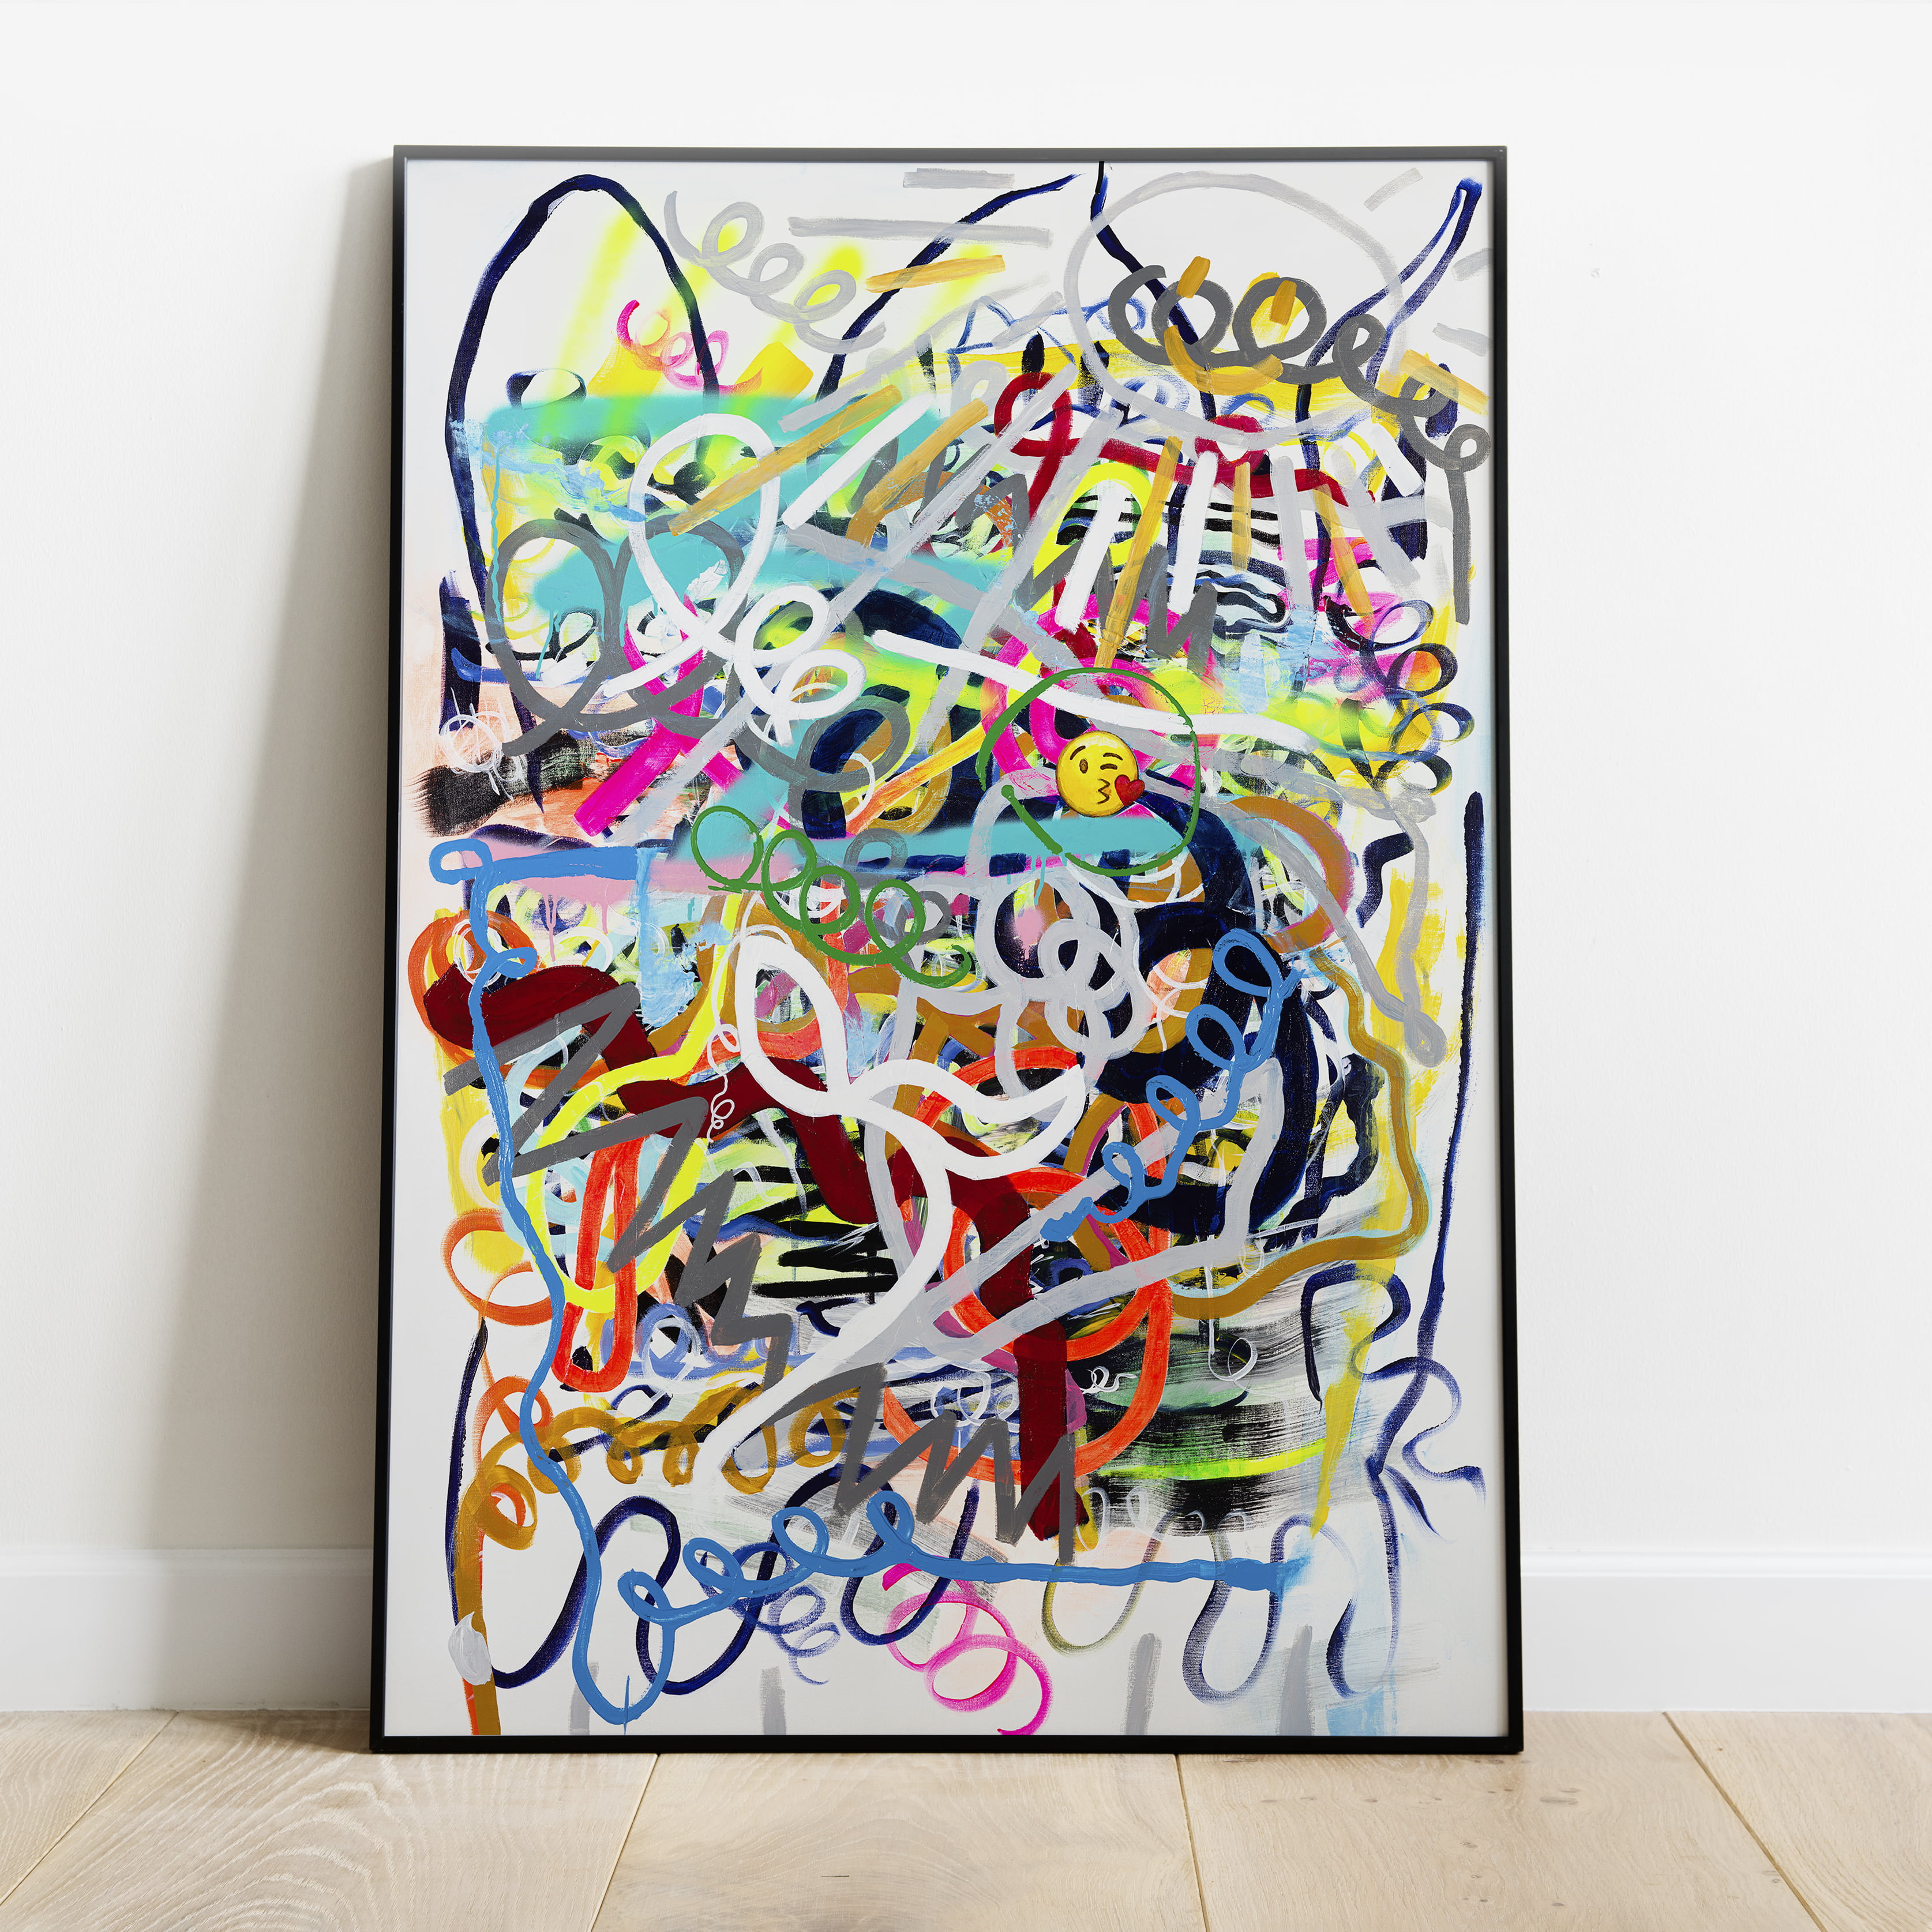 Colorful Modern Abstract Print on Canvas with Kiss Emoji